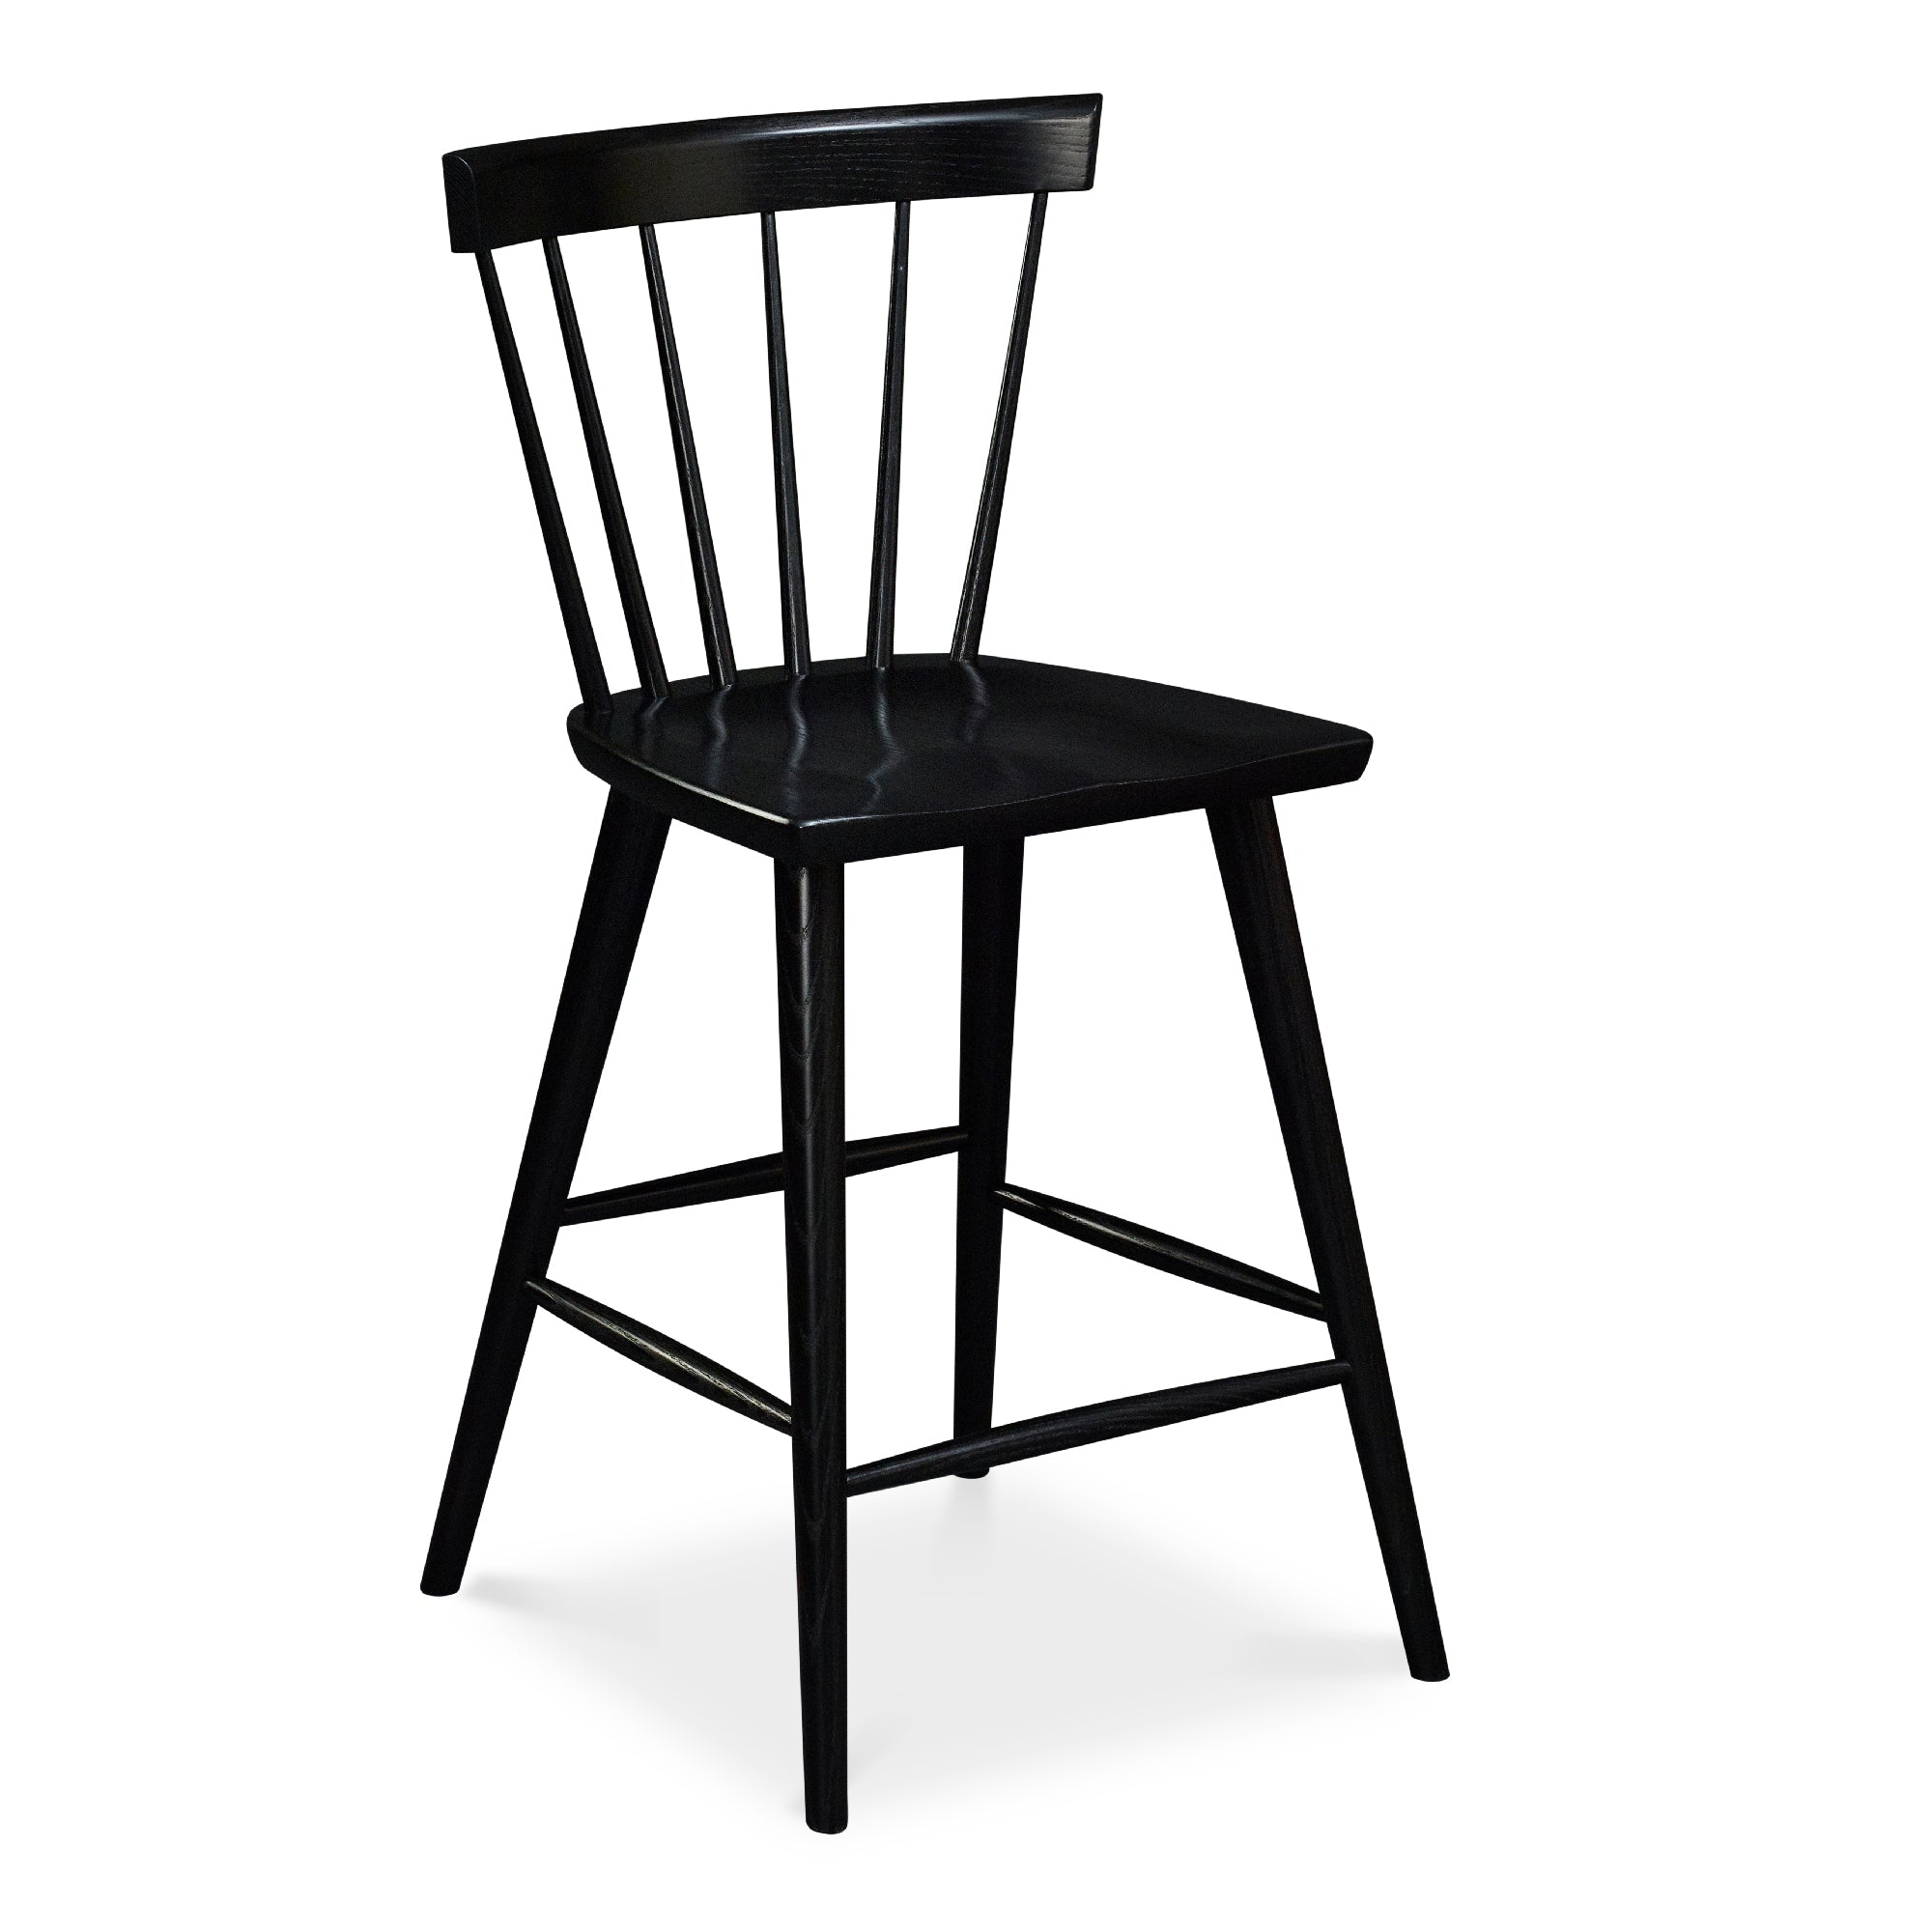 Modern Windsor inspired spindle stool with curved back in painted black